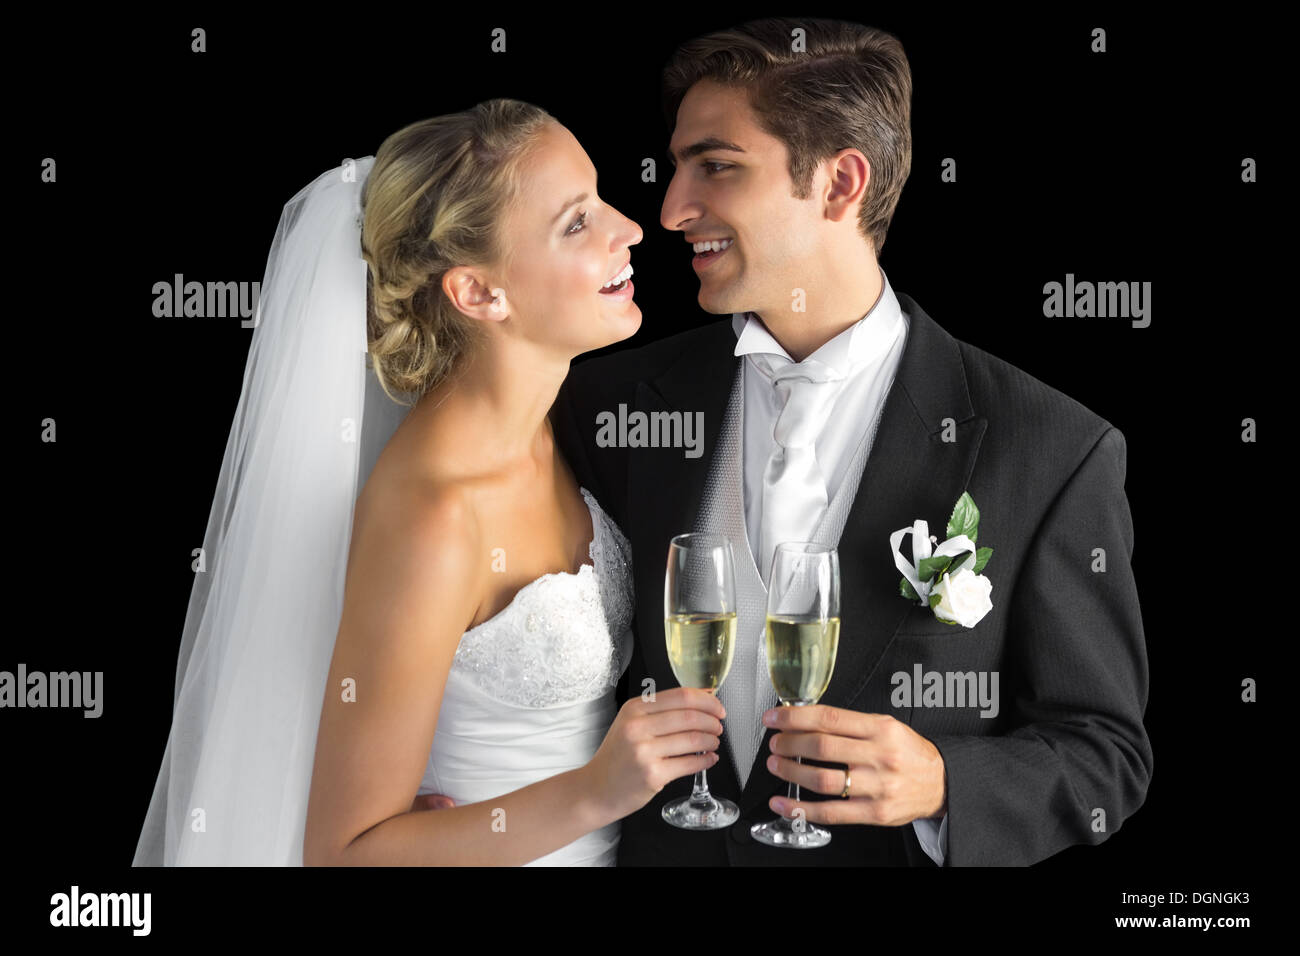 Cheerful married couple holding champagne glasses Banque D'Images